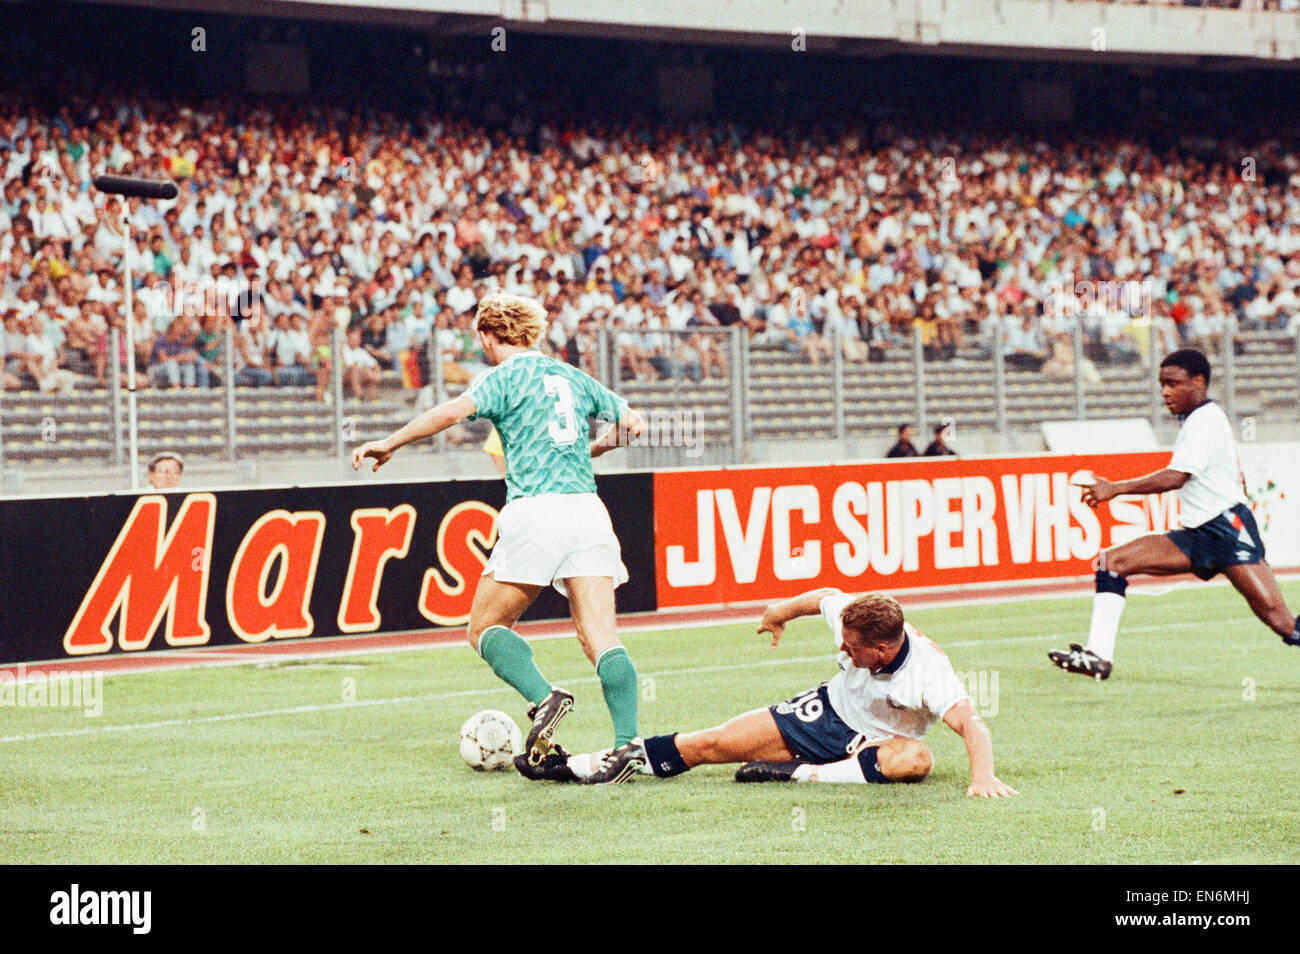 1990 World Cup Semi Final match the Stadio delle Alpi in Turin, Italy. West Germany 1 v England 1 (West Germany won on penalties). England's Paul Gascoigne challenges Andreas Brehme for the ball as Paul Parker moves in during the match. 4th July 1990. Stock Photo